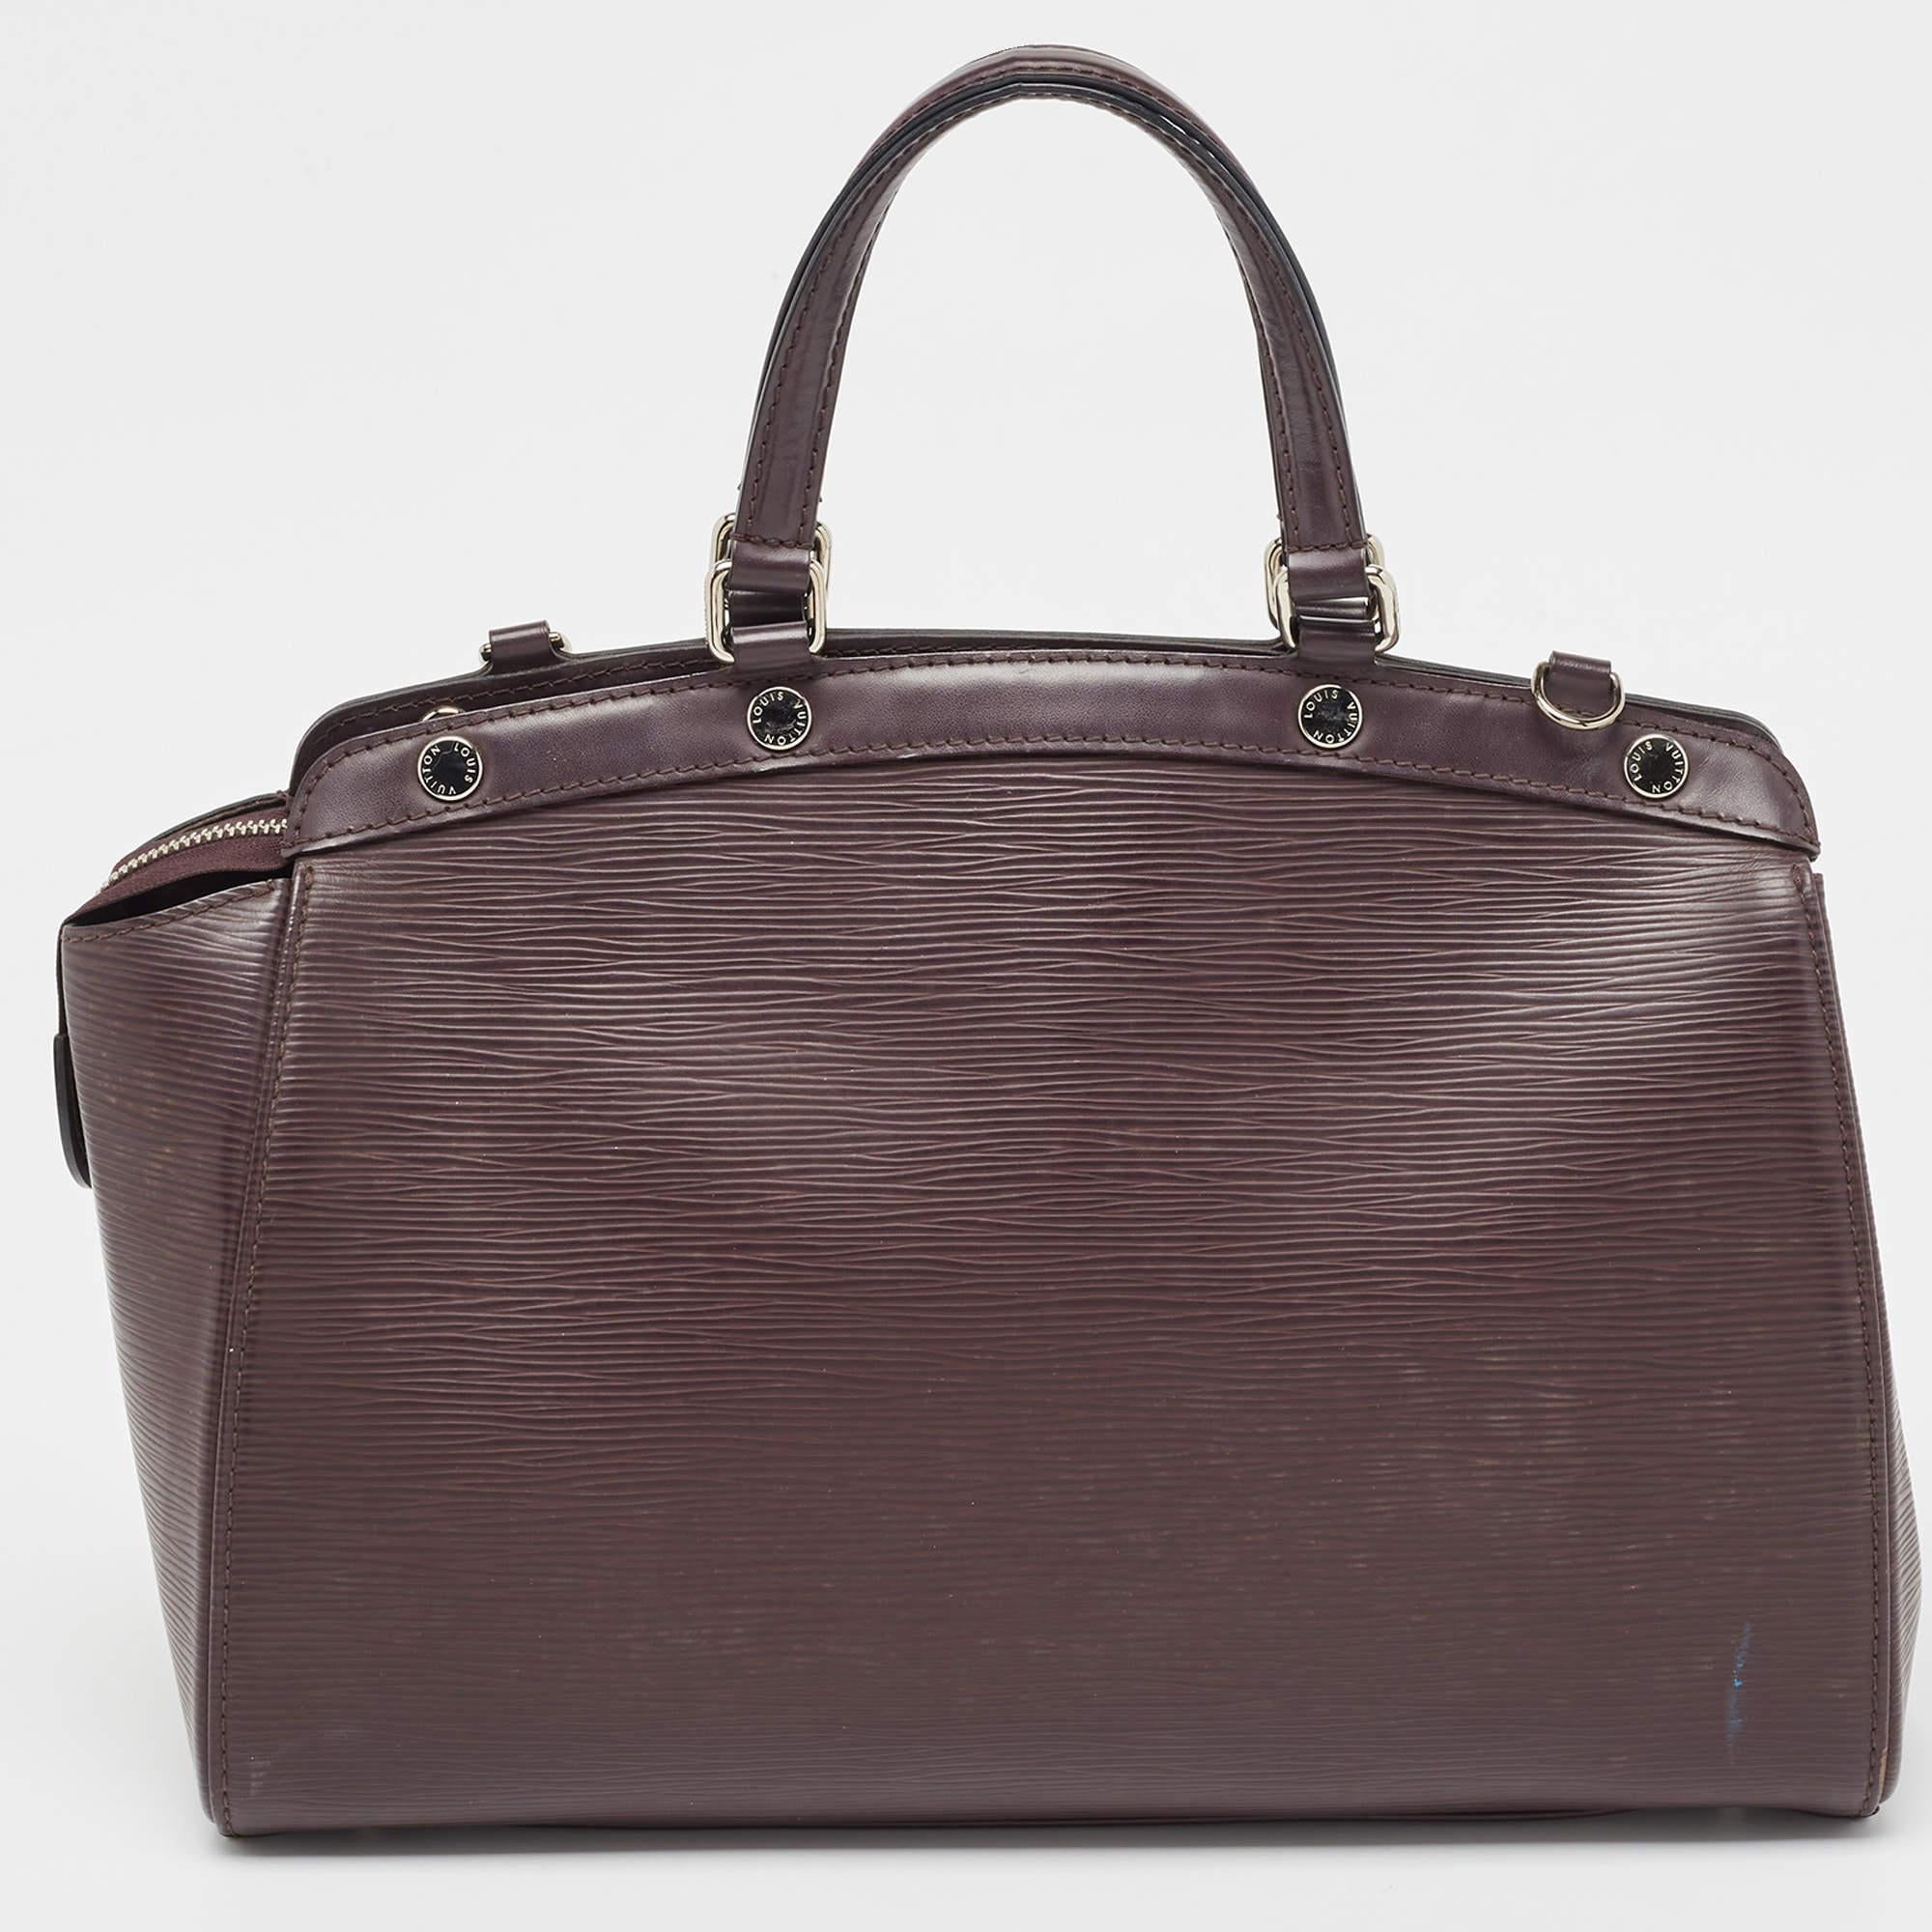 The feminine shape of Louis Vuitton's Brea is inspired by the doctor's bag. Crafted from Epi leather in a lovely shade of brown, the bag has a perfect finish. The fabric interior is spacious and it is secured by a zipper. The bag features double